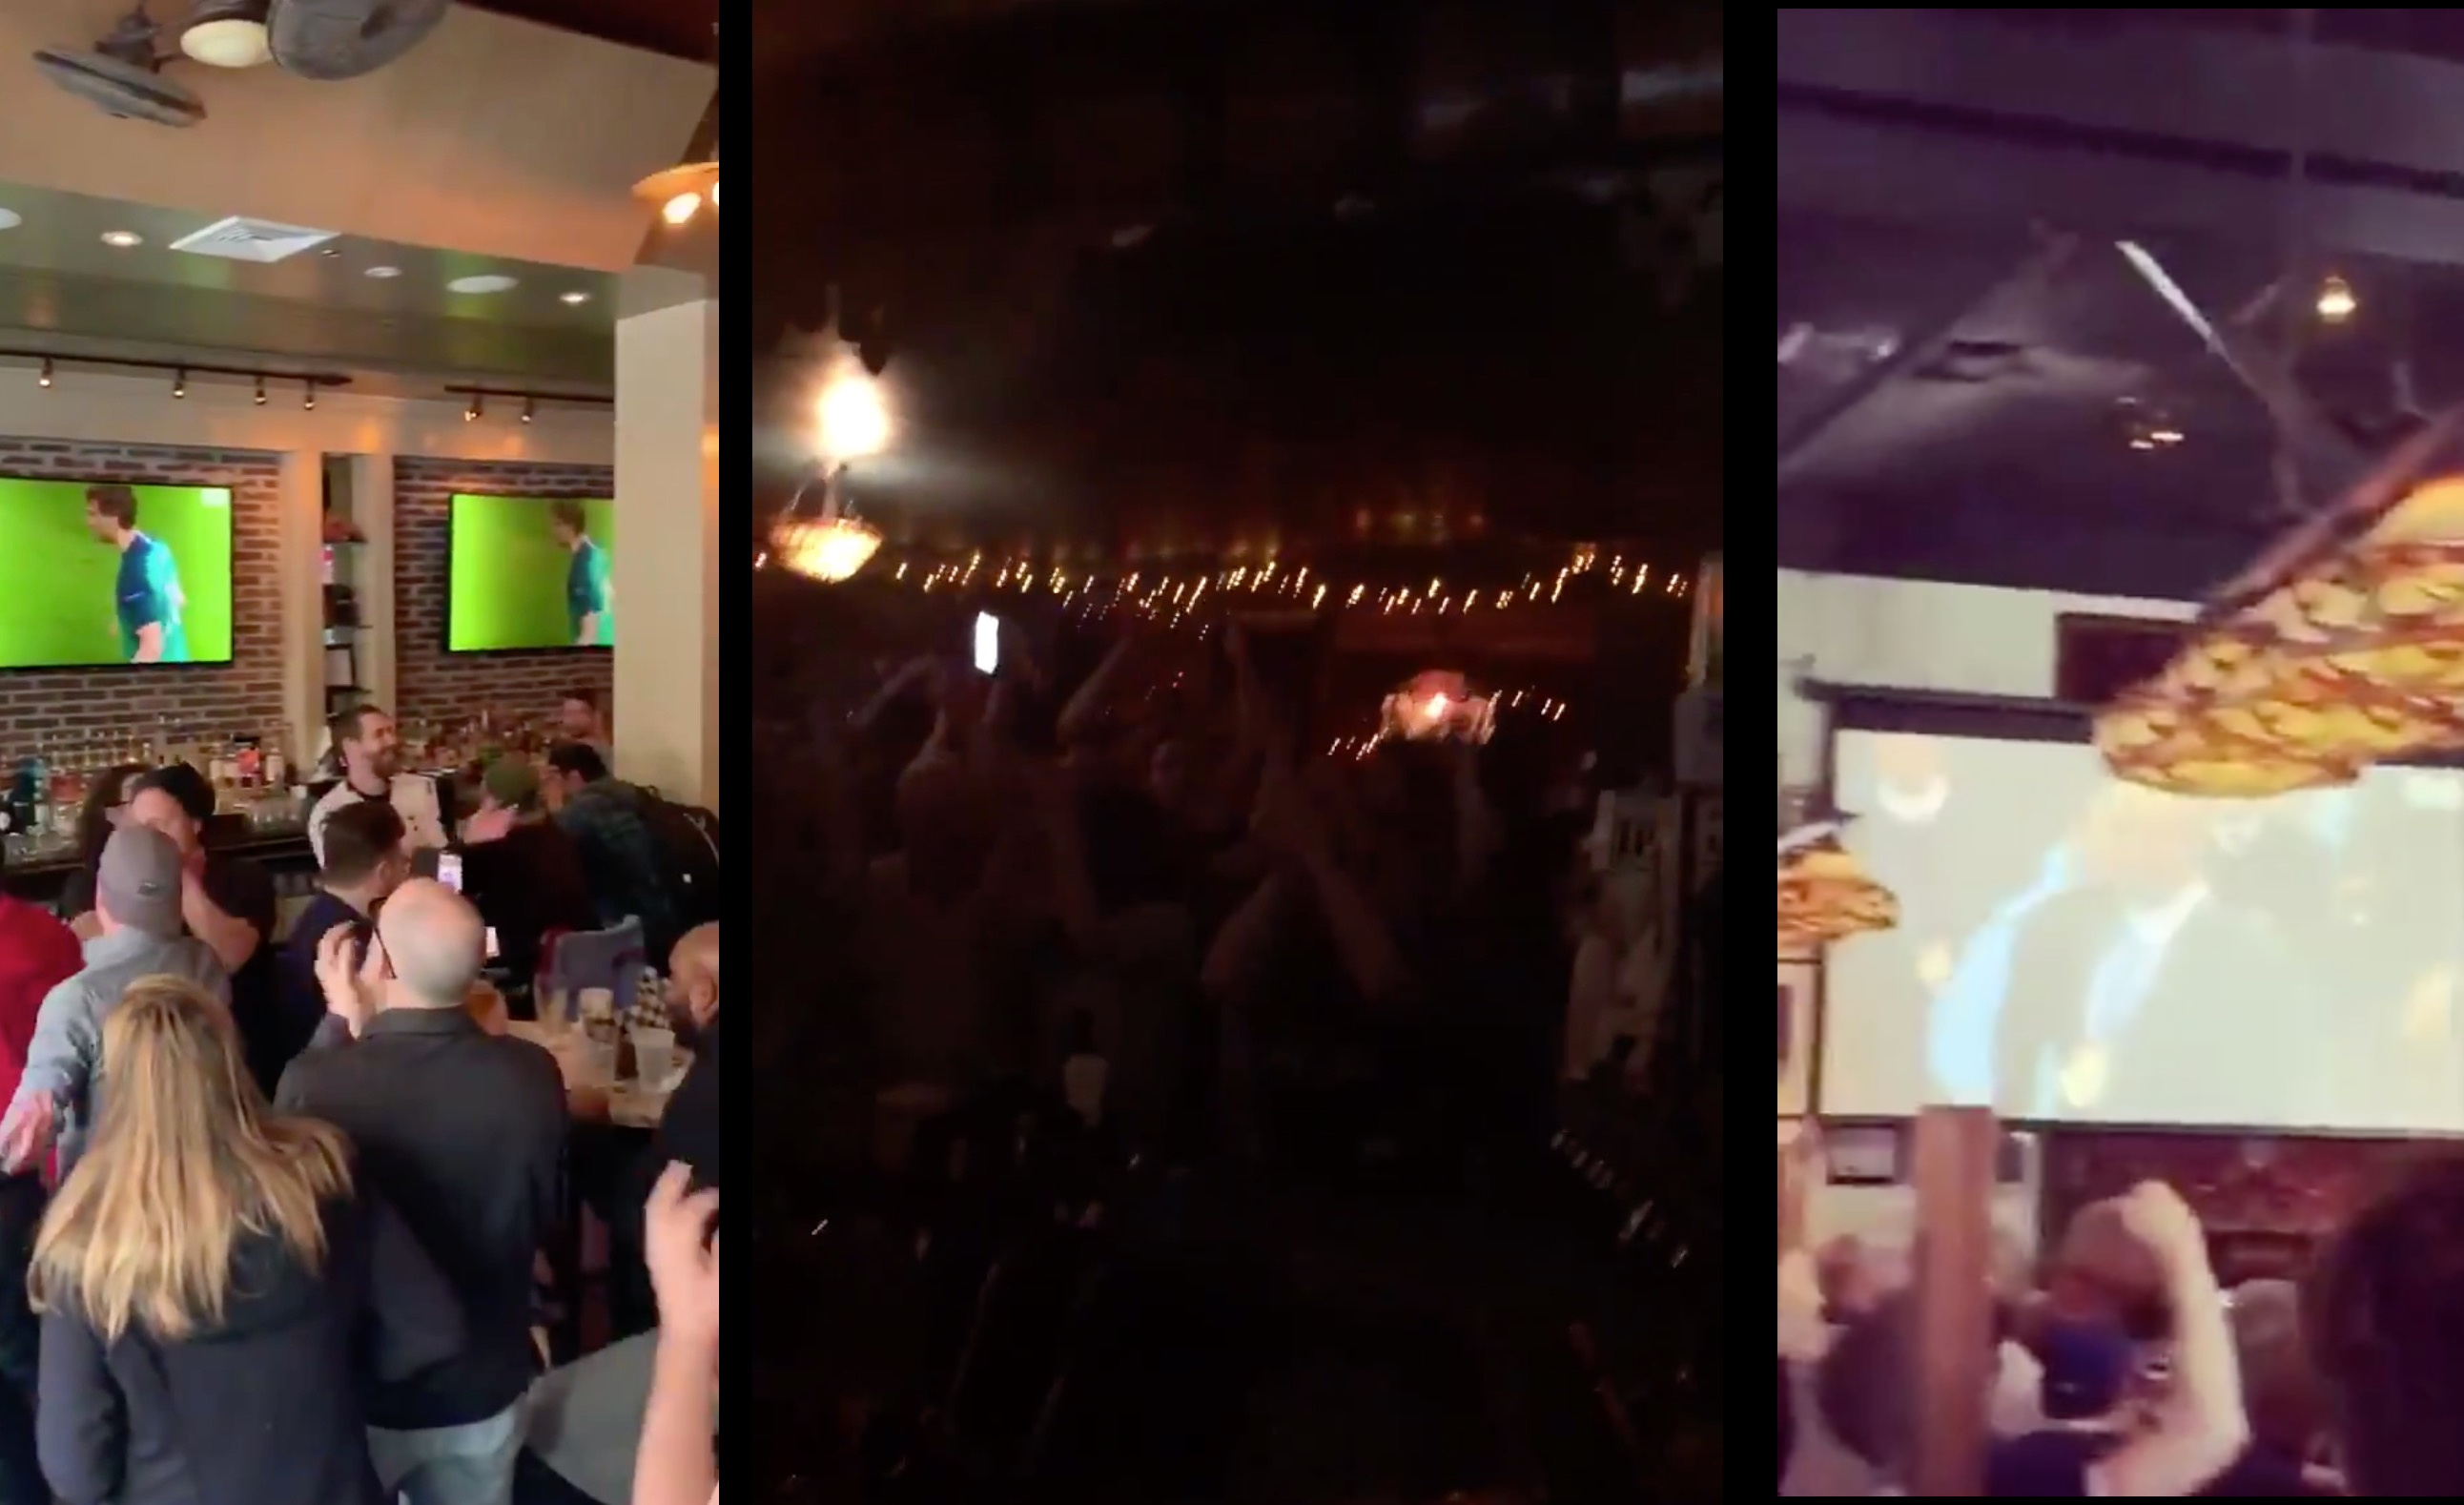 Bars and pubs around the world go mental after Tottenham progressed to the CL semi-finals